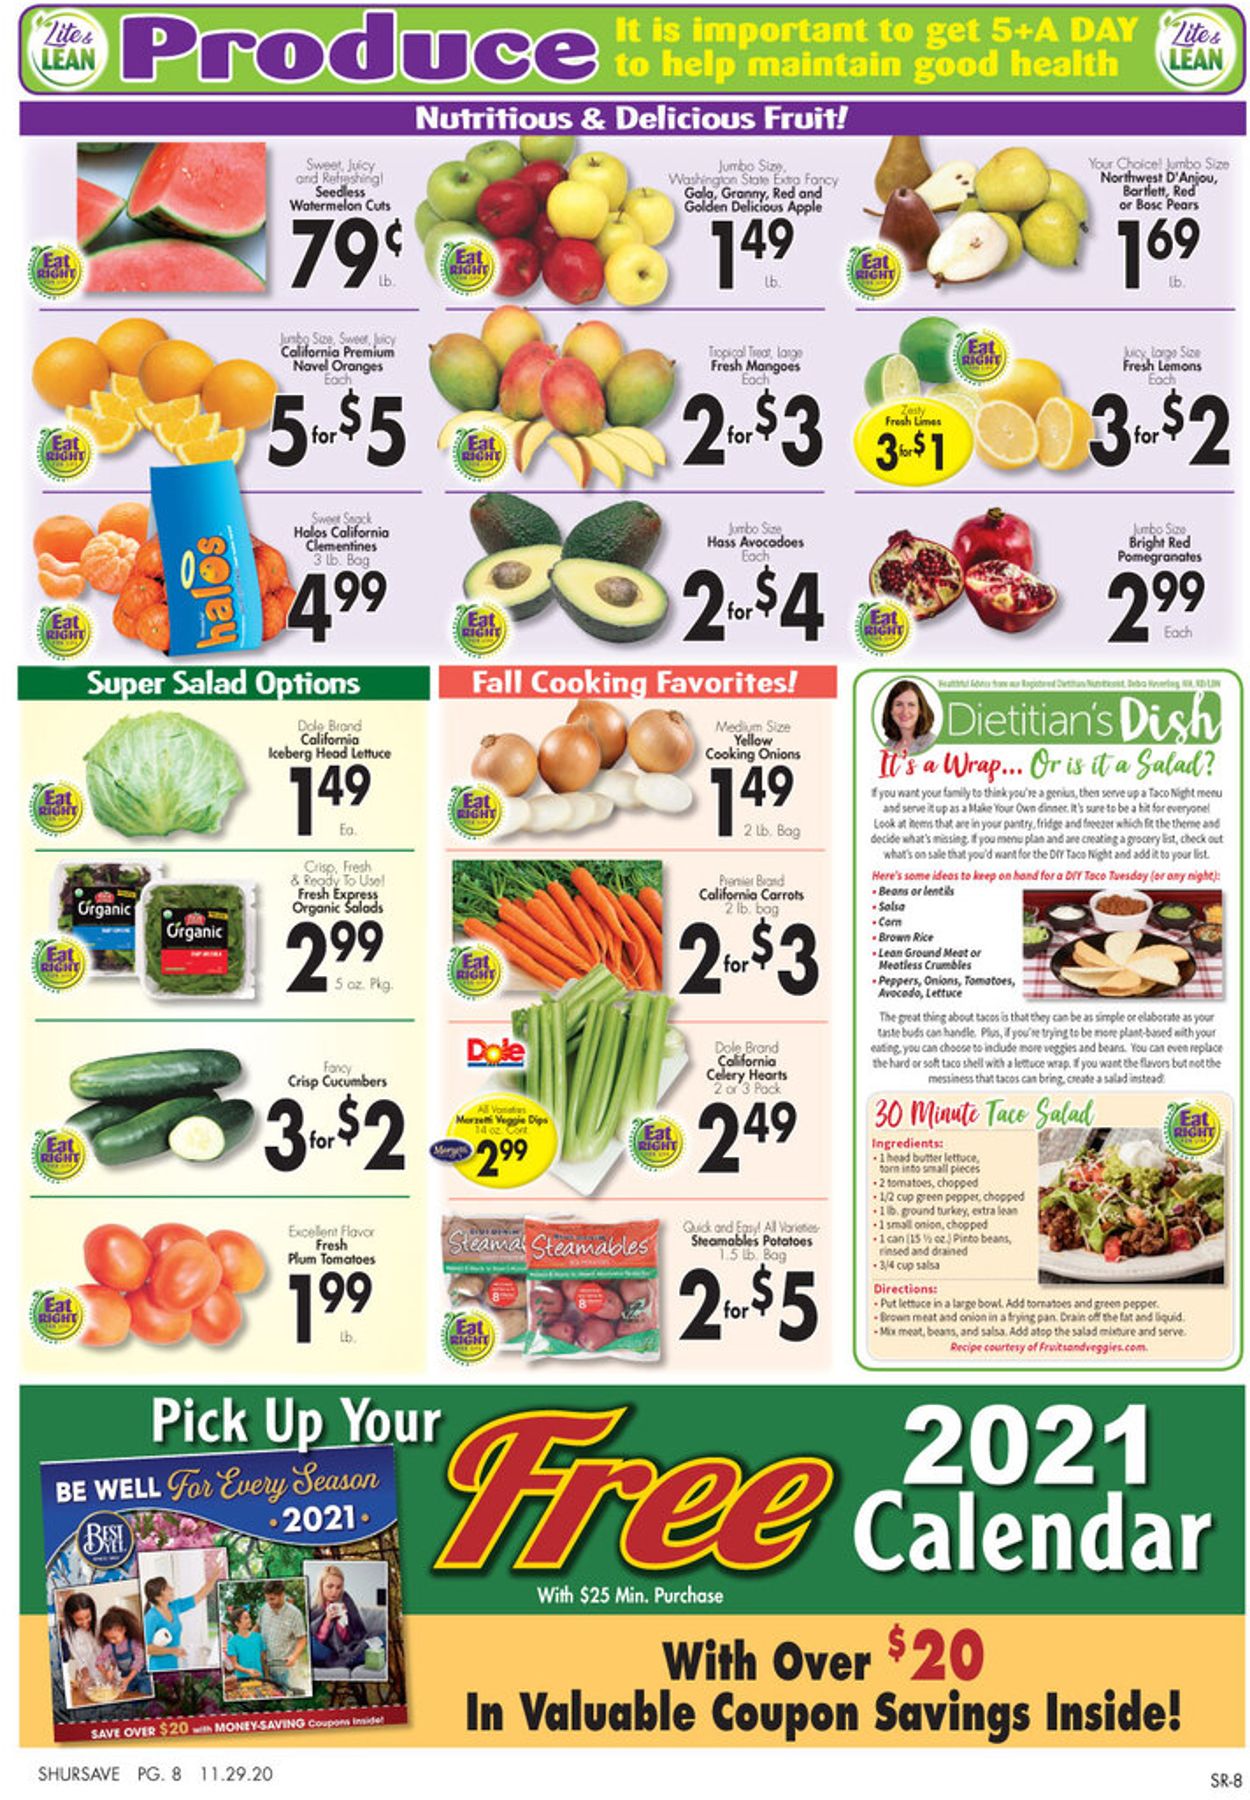 Gerrity's Supermarkets - Cyber Monday 2020 Weekly Ad Circular - valid 11/29-12/05/2020 (Page 13)